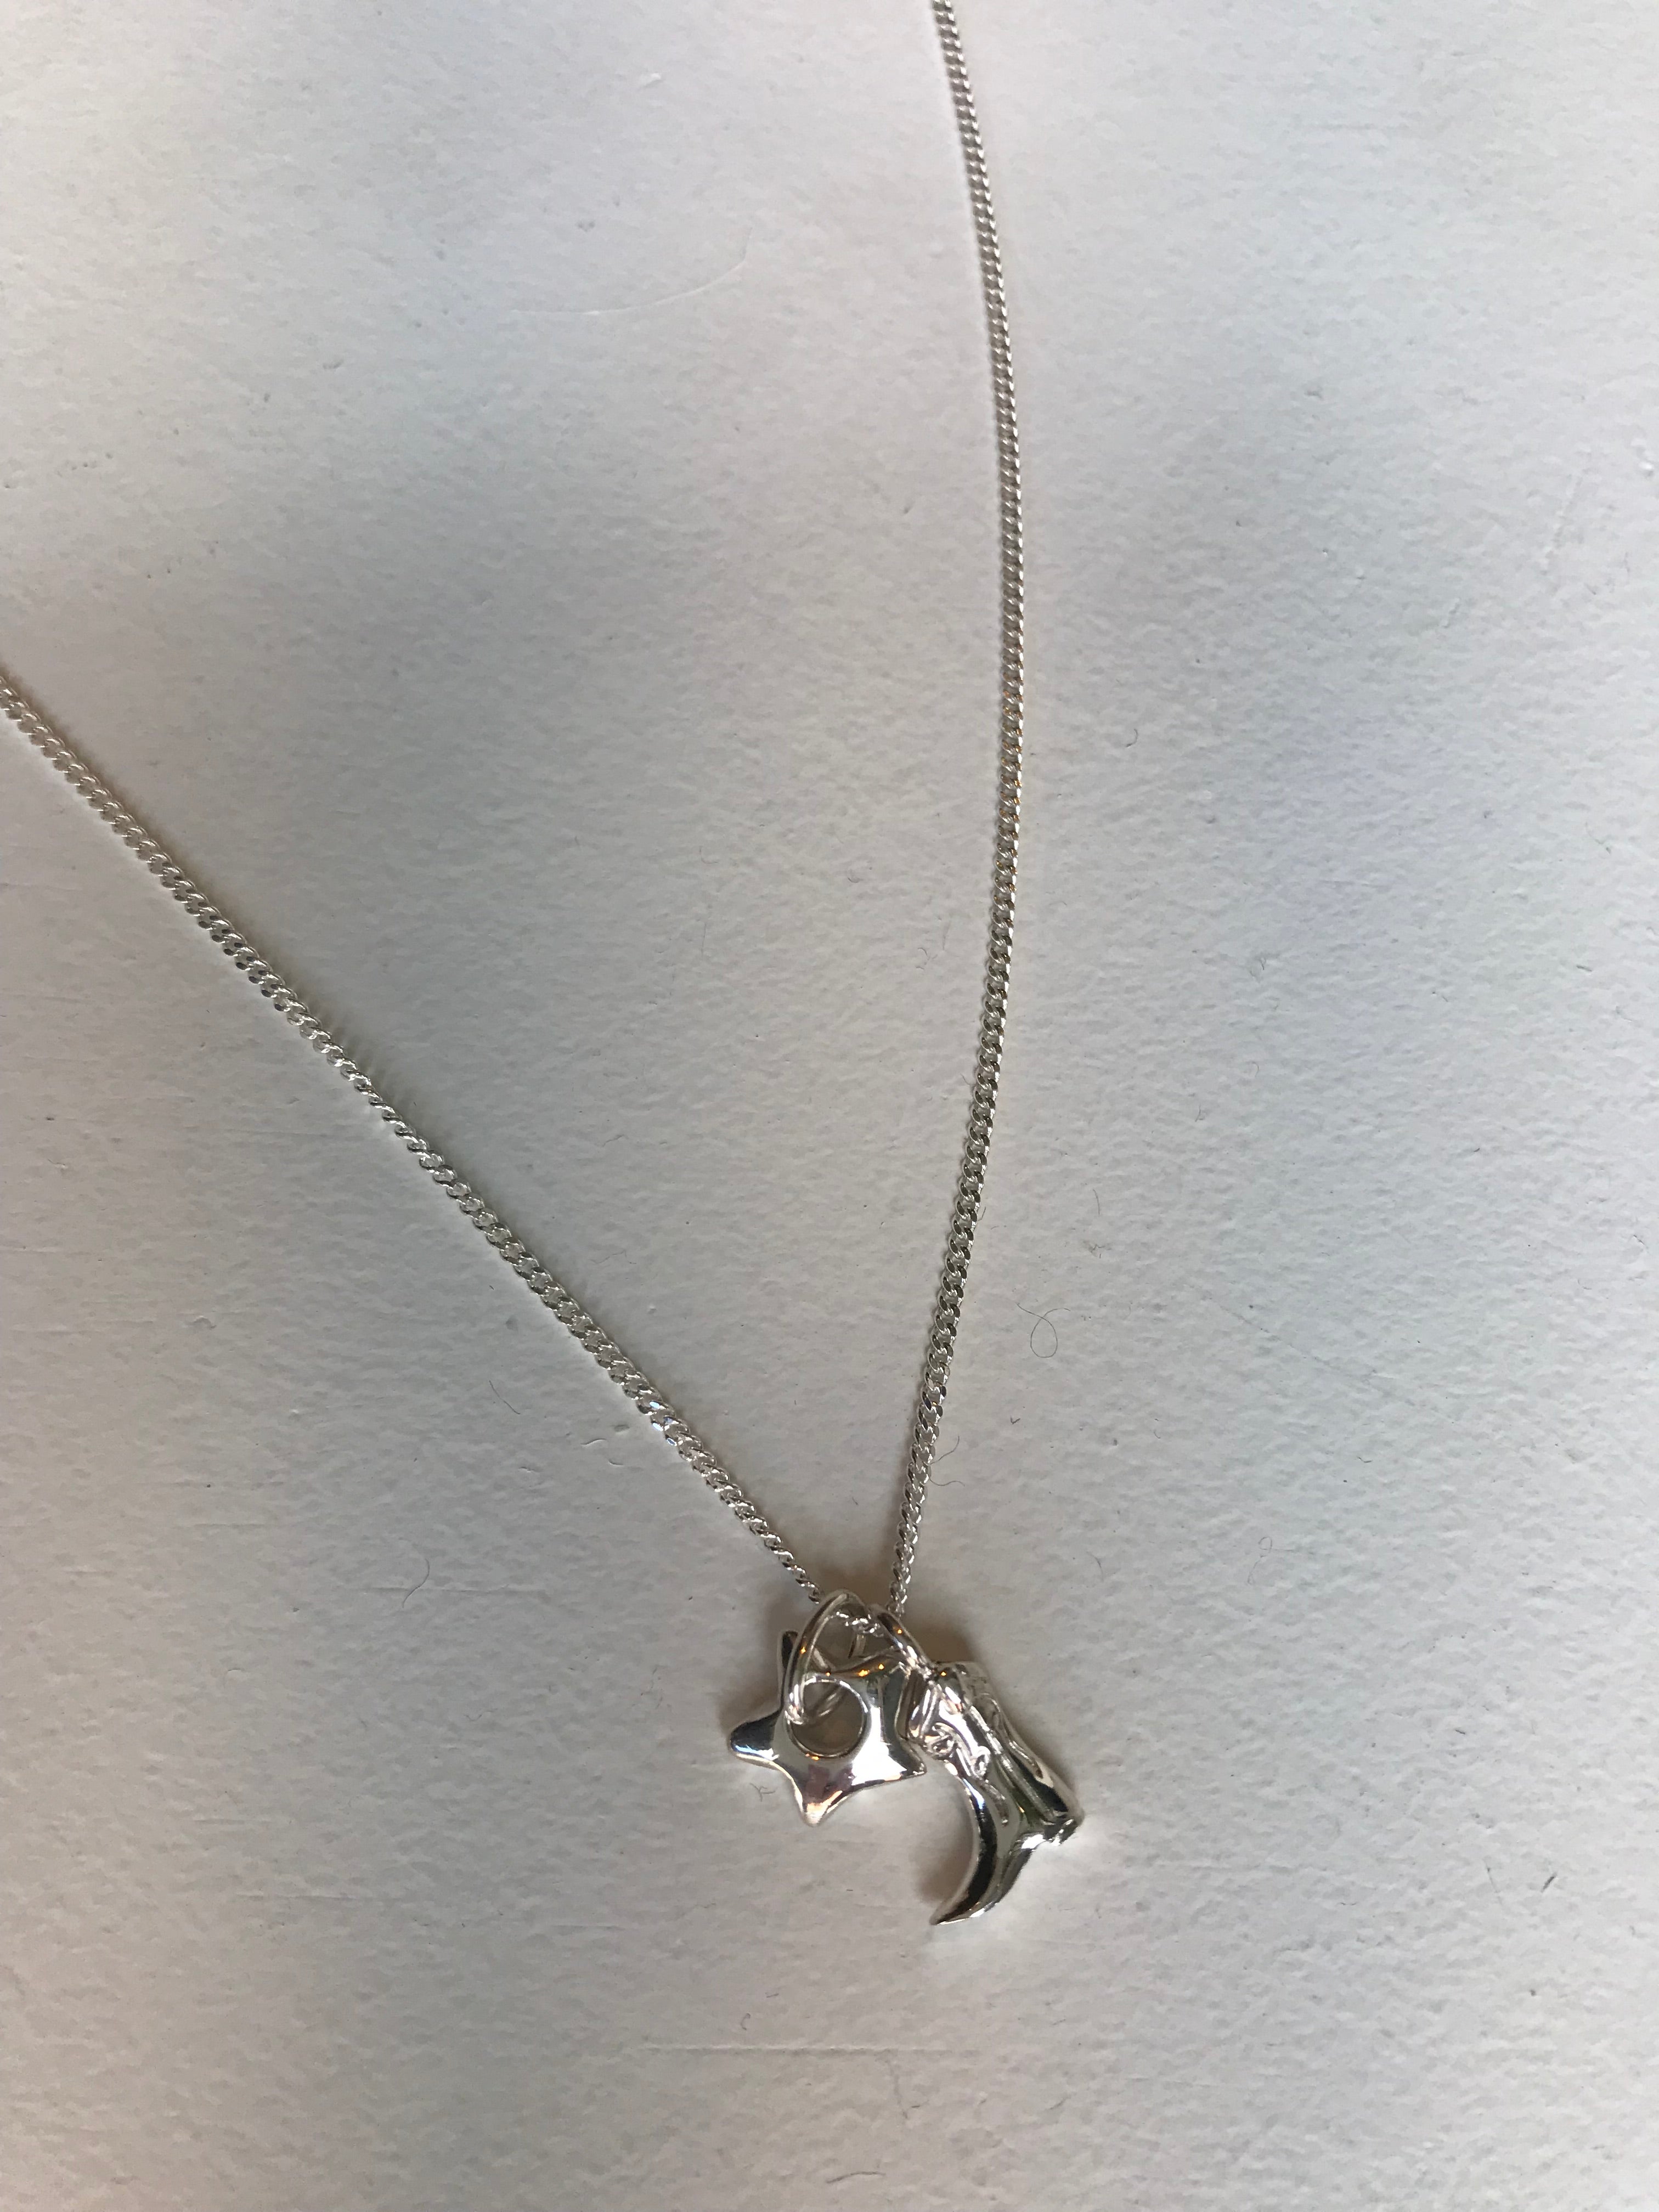 Mini Cowboy Boot & Star Charm Necklace in Sterling Silver